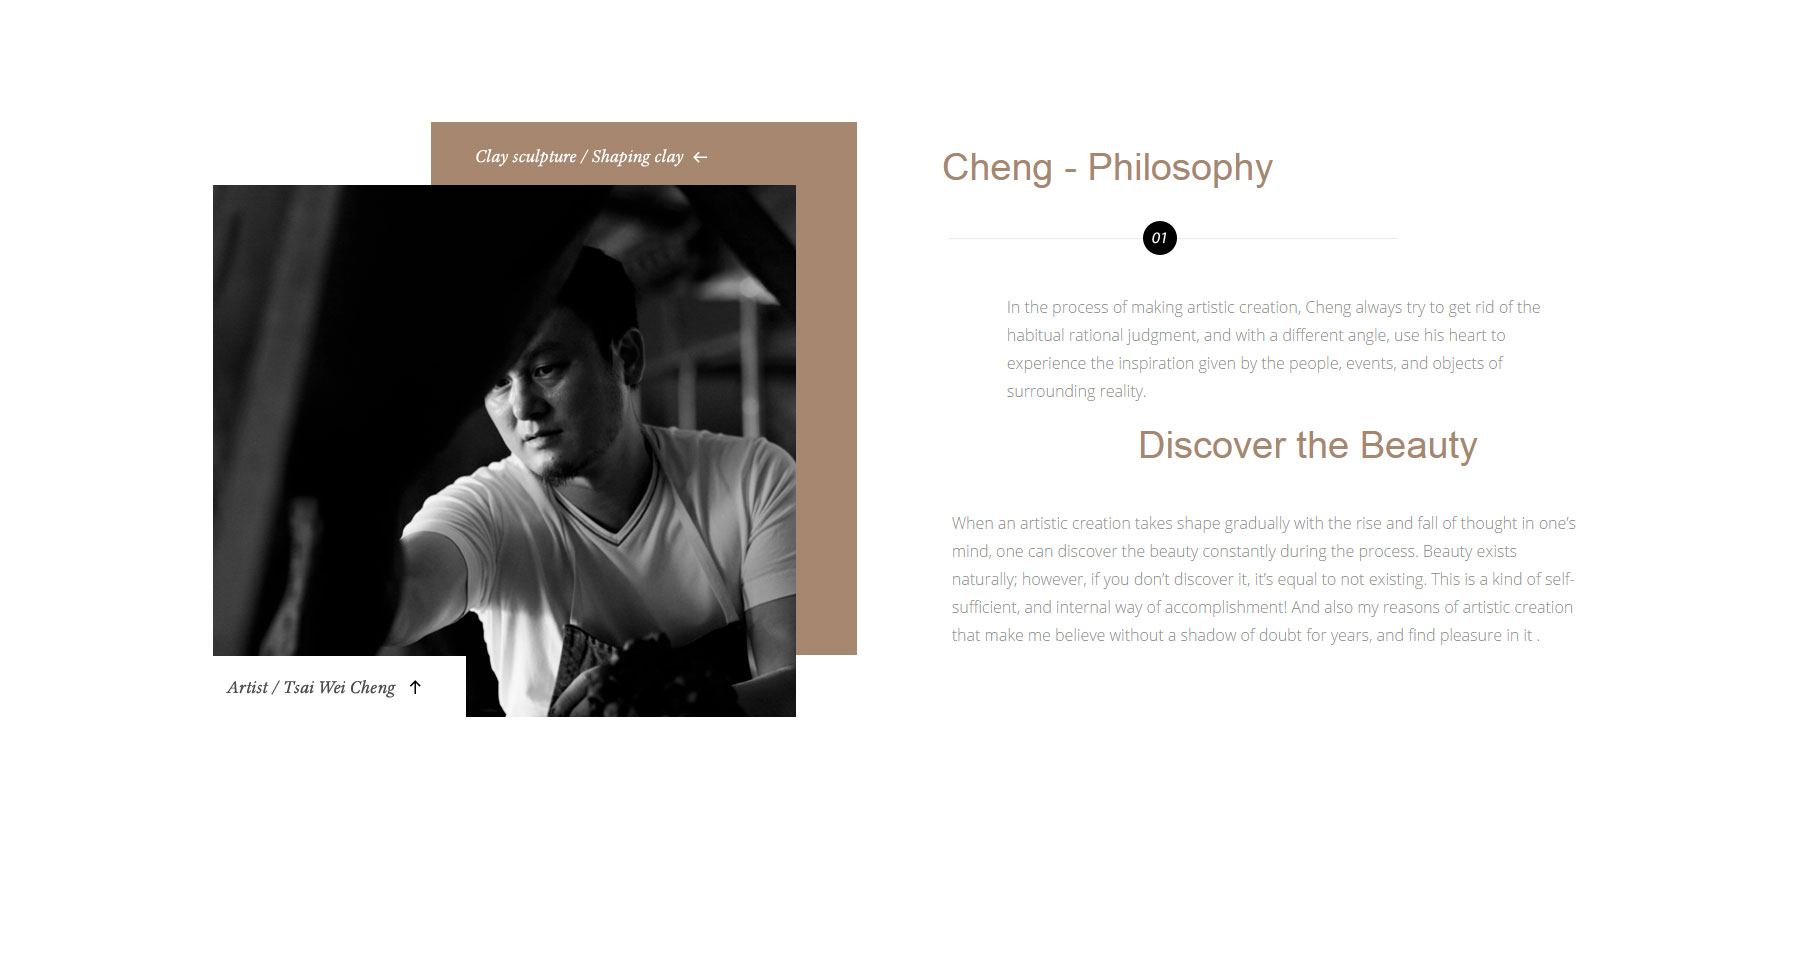 The Creative Sculpture of Cheng - Website of the Day